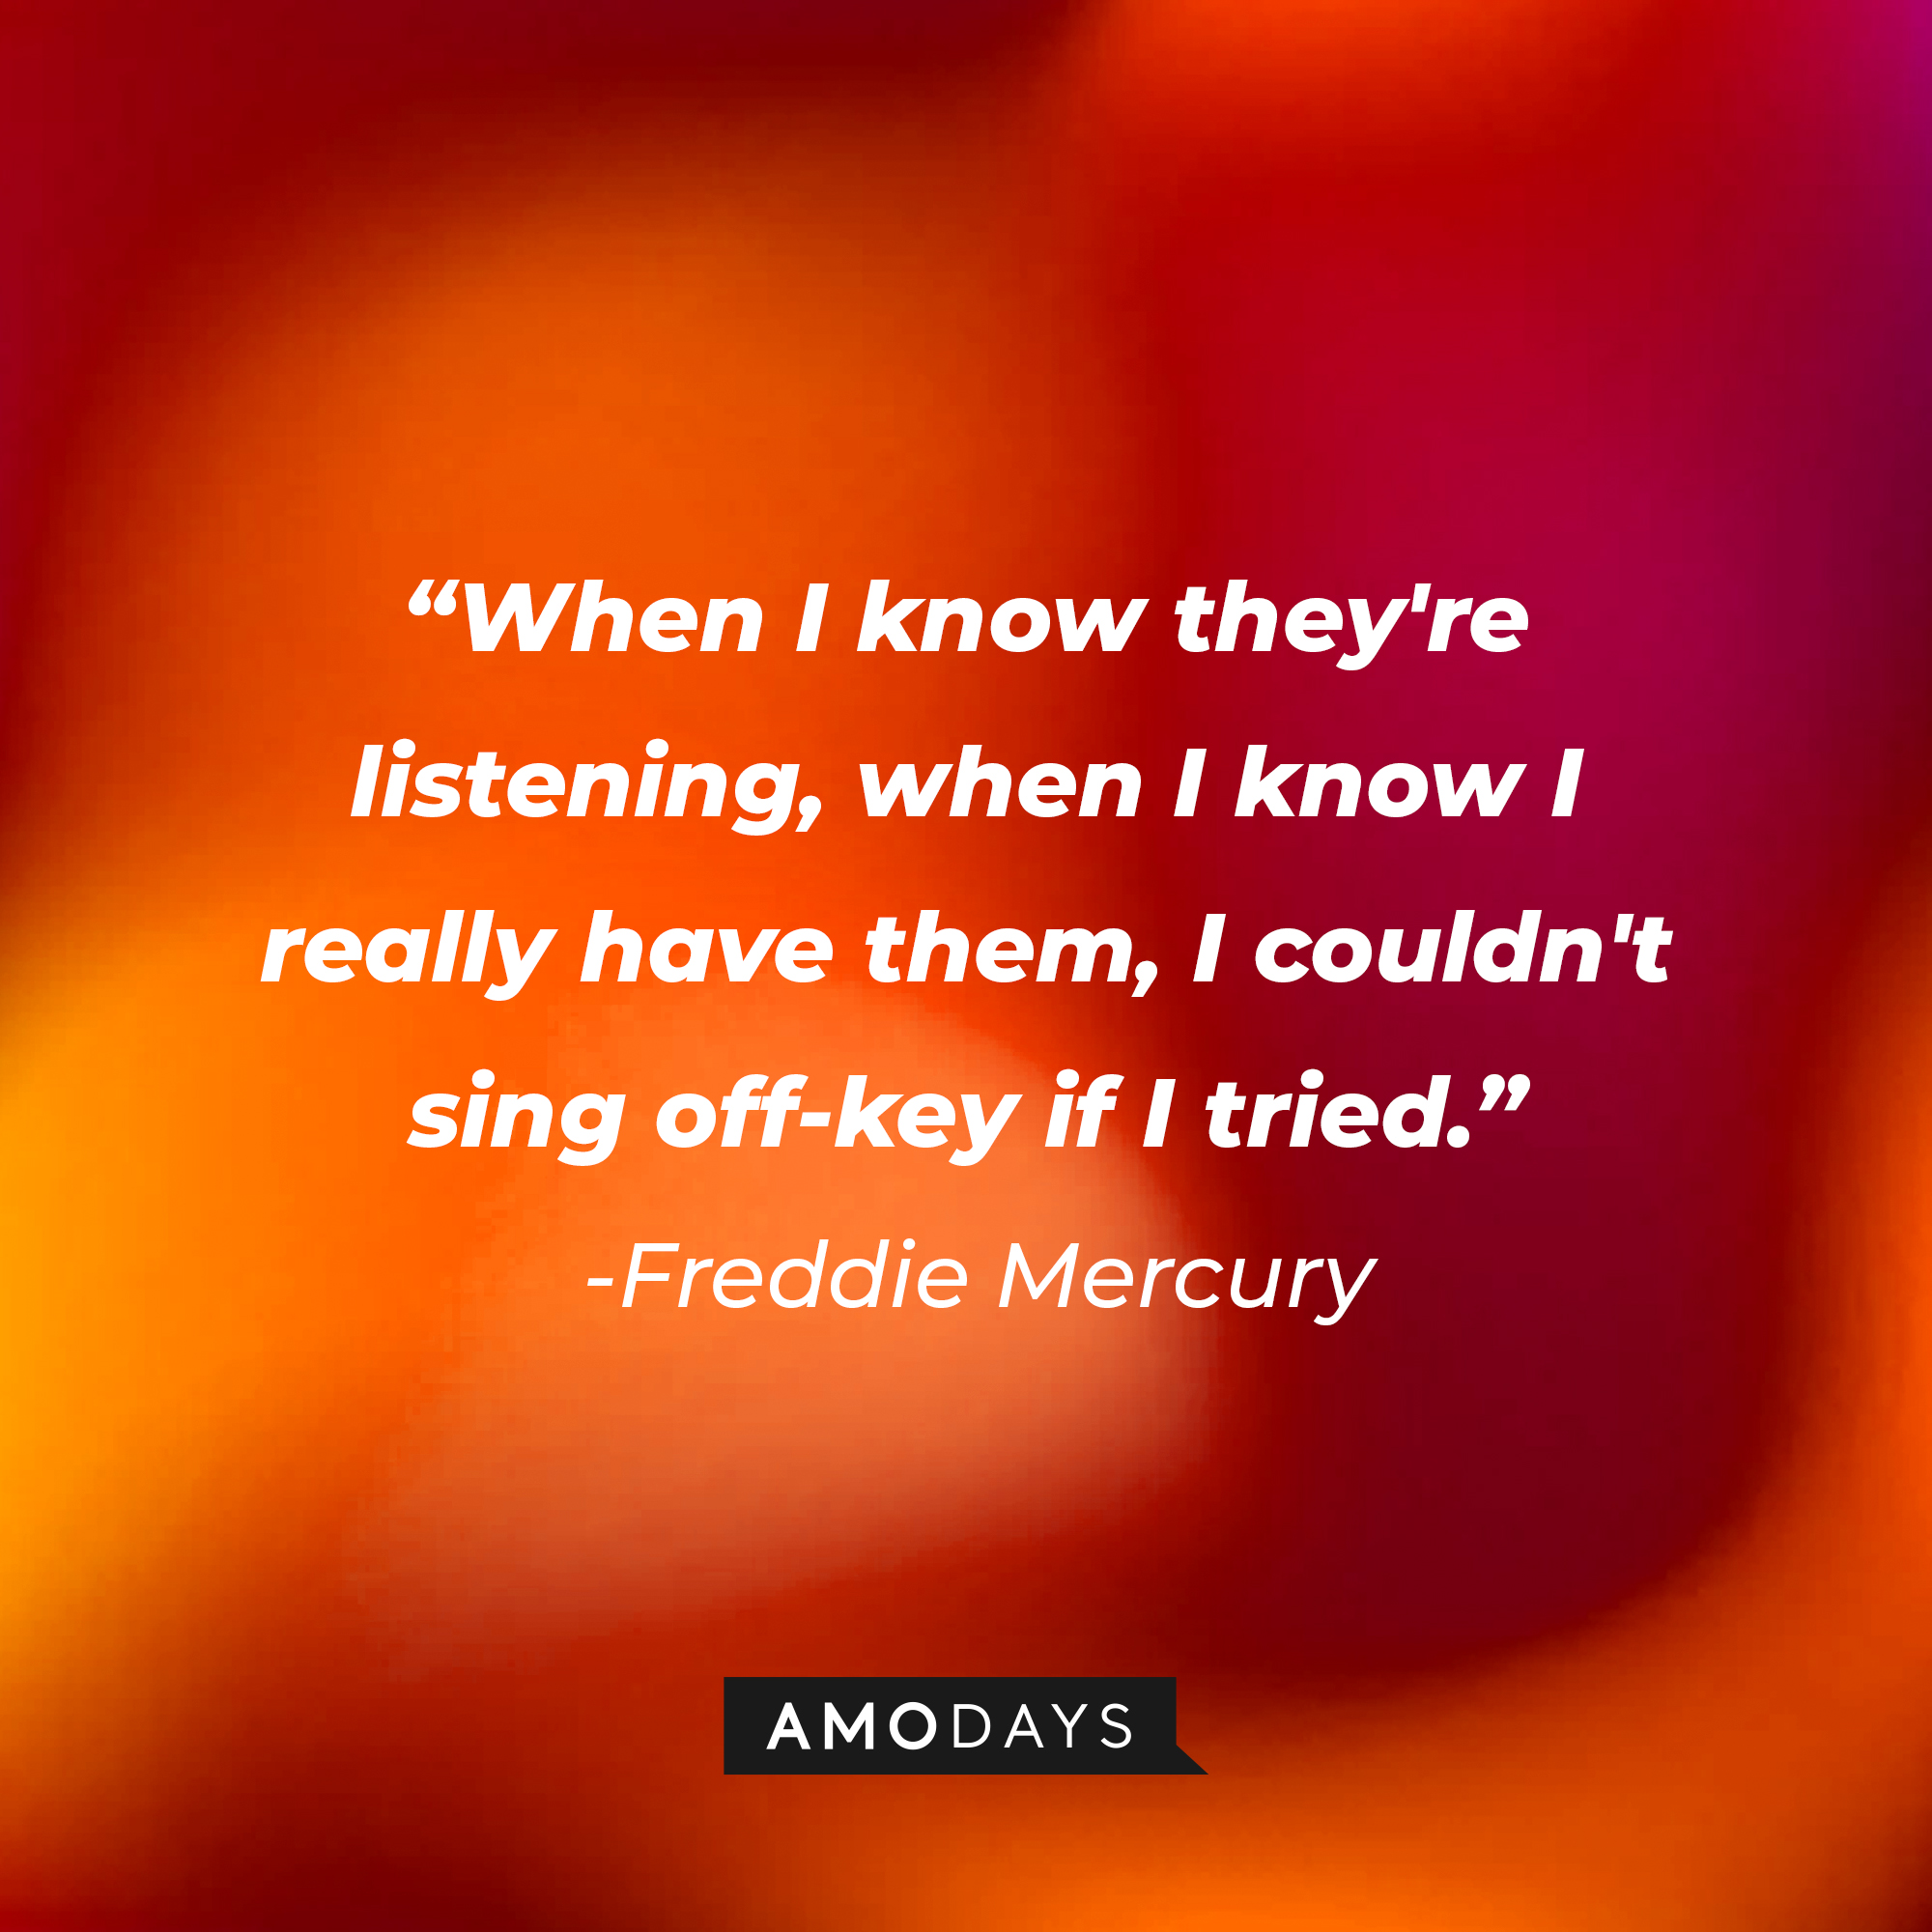 Freddie Mercury's quote: "When I know they're listening, when I know I really have them, I couldn't sing off-key if I tried." | Image: Amodays